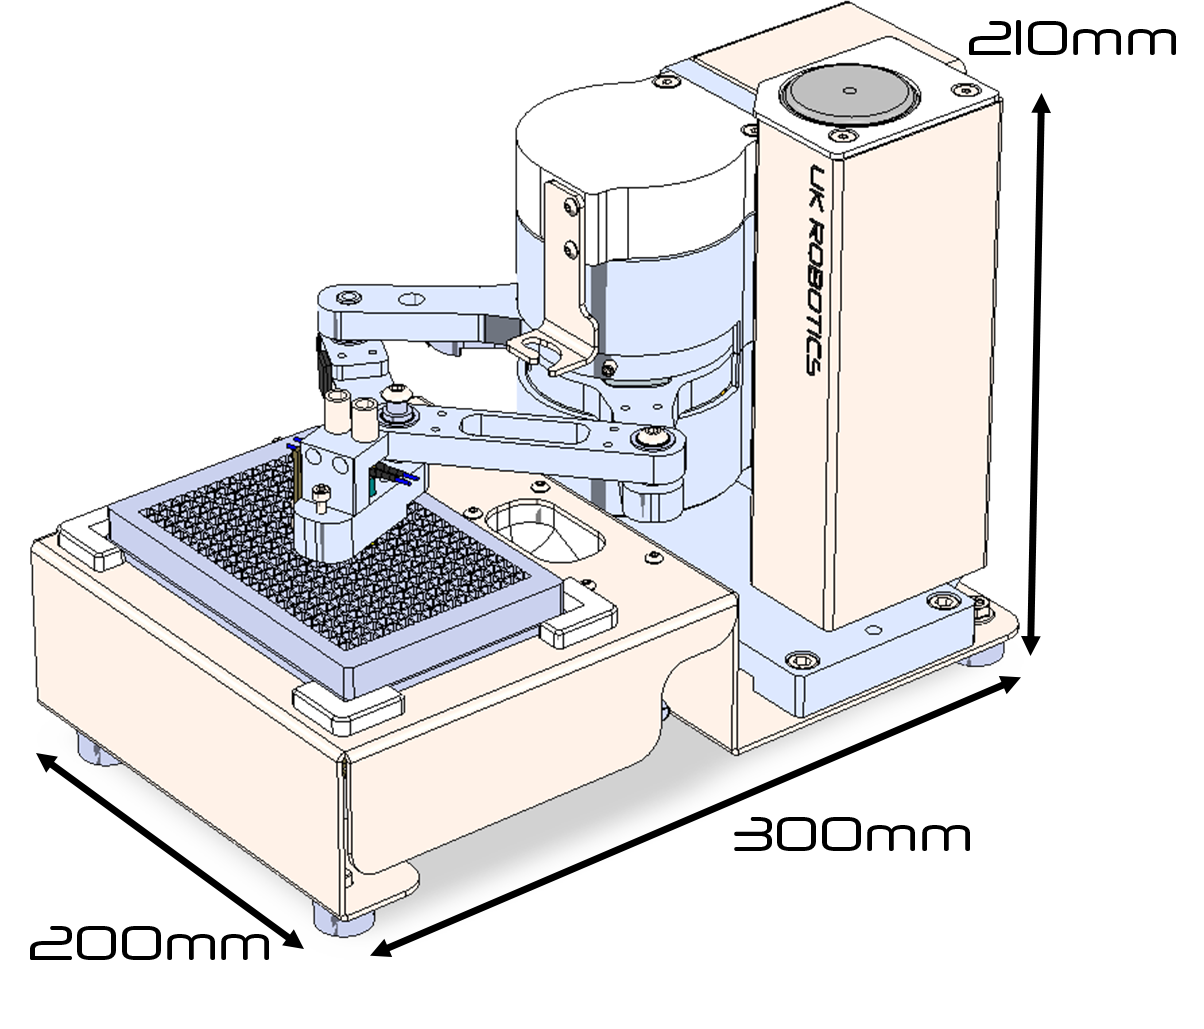 Image showing the dimensions of the D2 nanolitre SBS plate Dispenser